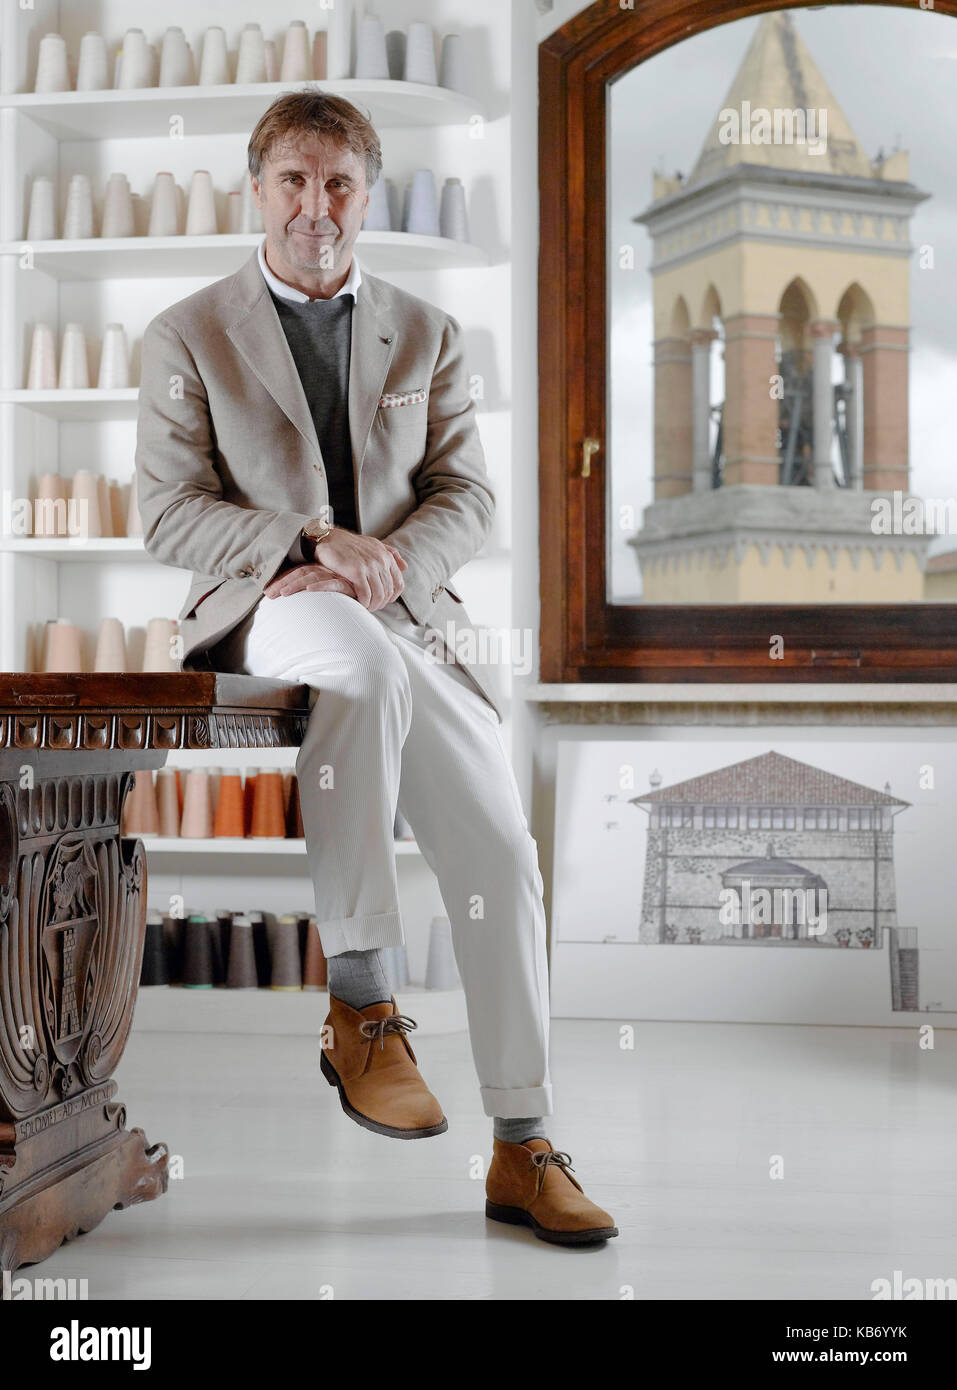 Brunello Cucinelli fashion designer and producer of cashmere clothing